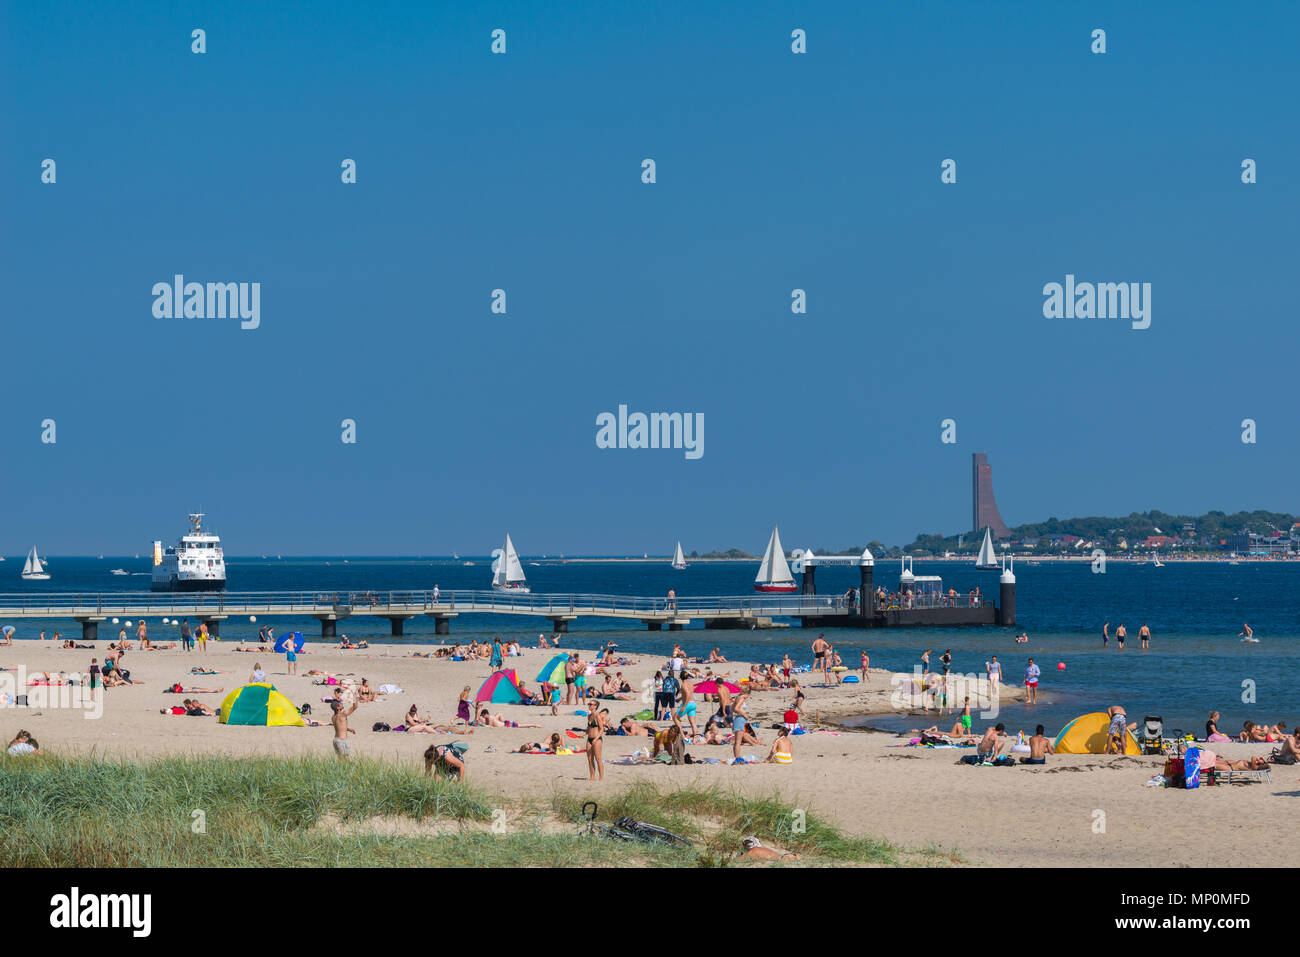 Relaxing at a hot summer day at the beach 'Falkensteiner Strand', the fjord liner coming up to the pier, Kiel Fjord, Kiel, Germany, Stock Photo